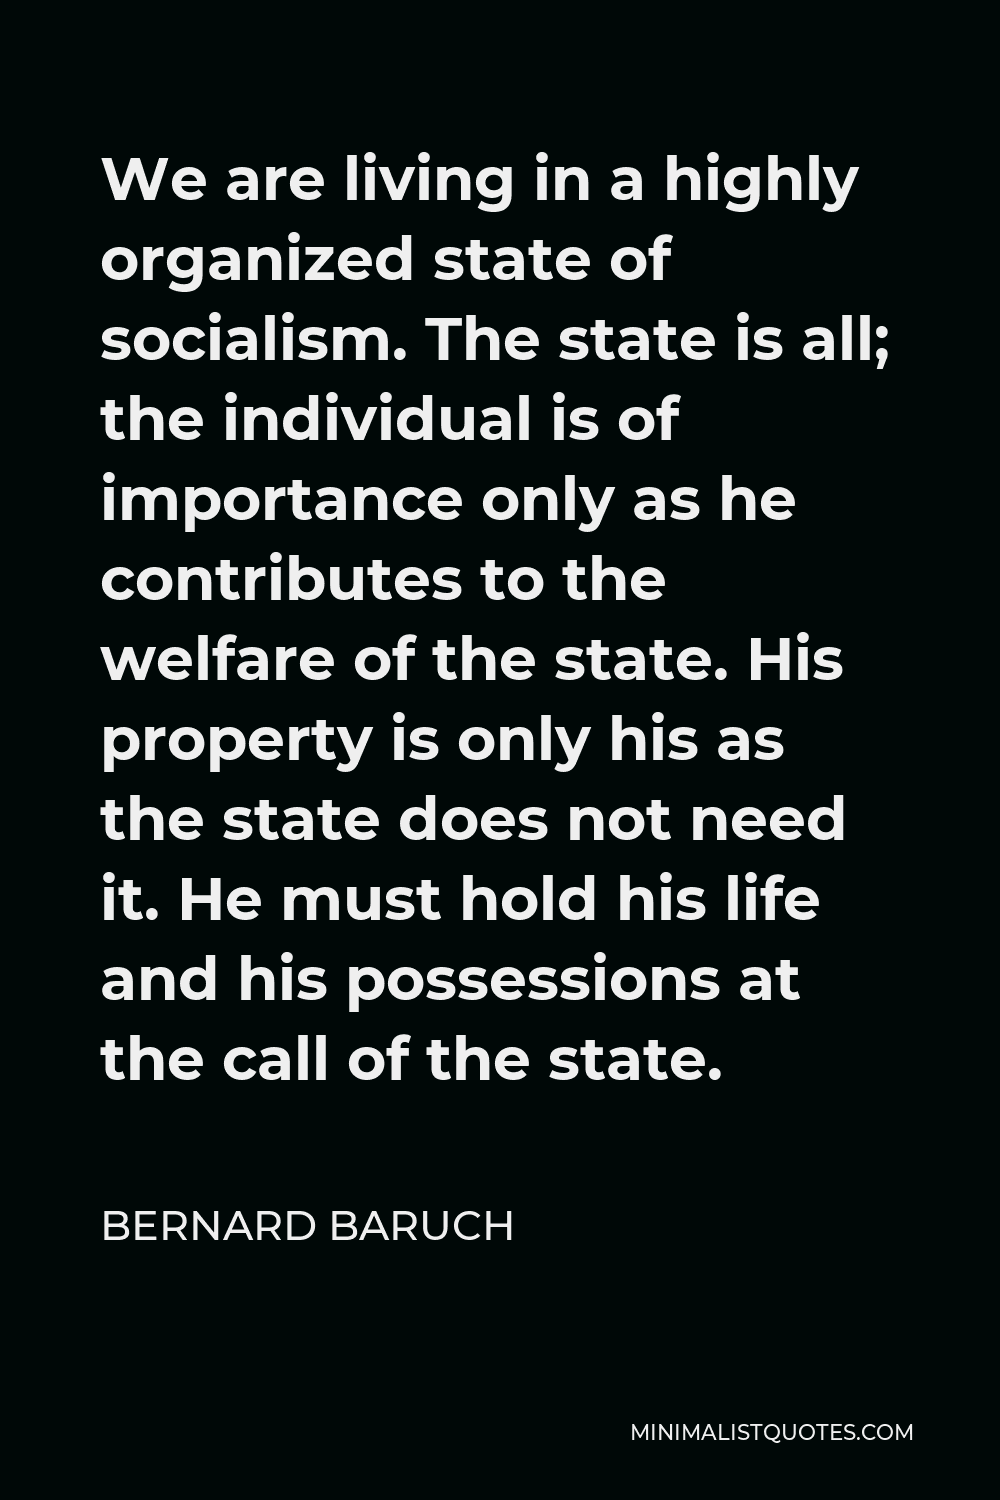 Bernard Baruch Quote - We are living in a highly organized state of socialism. The state is all; the individual is of importance only as he contributes to the welfare of the state. His property is only his as the state does not need it. He must hold his life and his possessions at the call of the state.